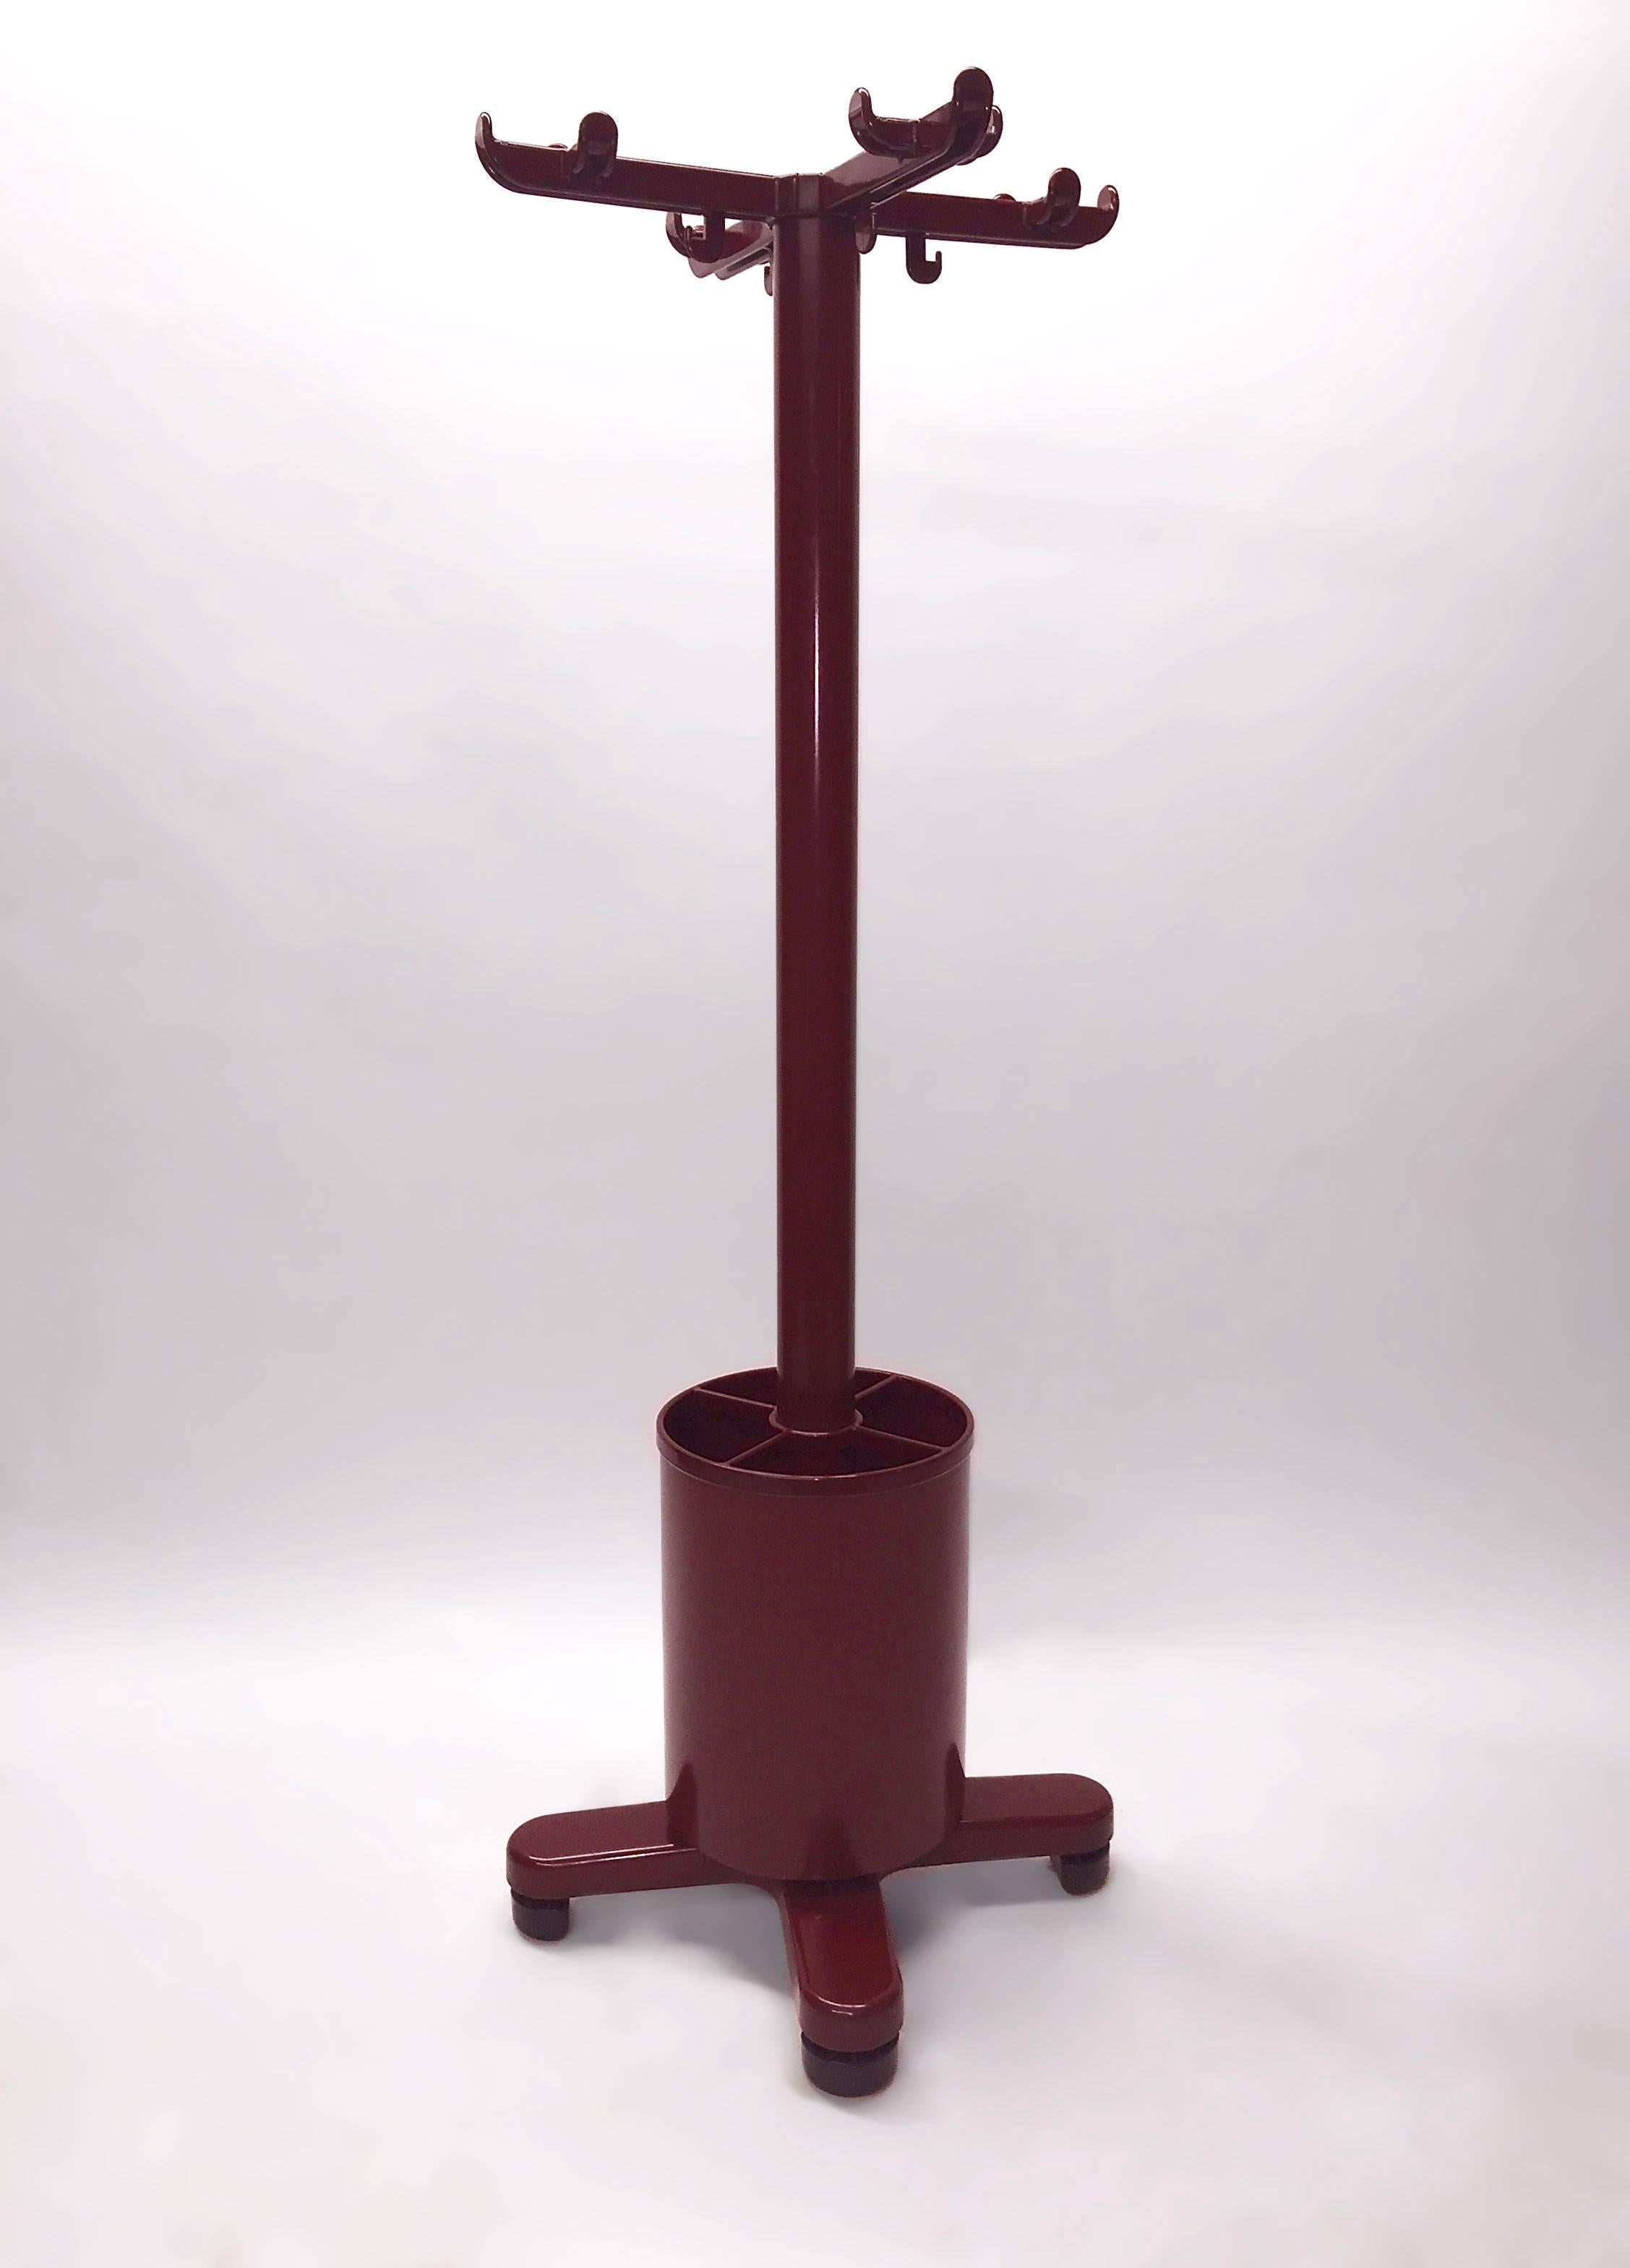 Freestanding coat rack has an umbrella stand resting on the base. Synthesis coat rack was designed in 1973 by Ettore Sottsass for Olivetti.
 